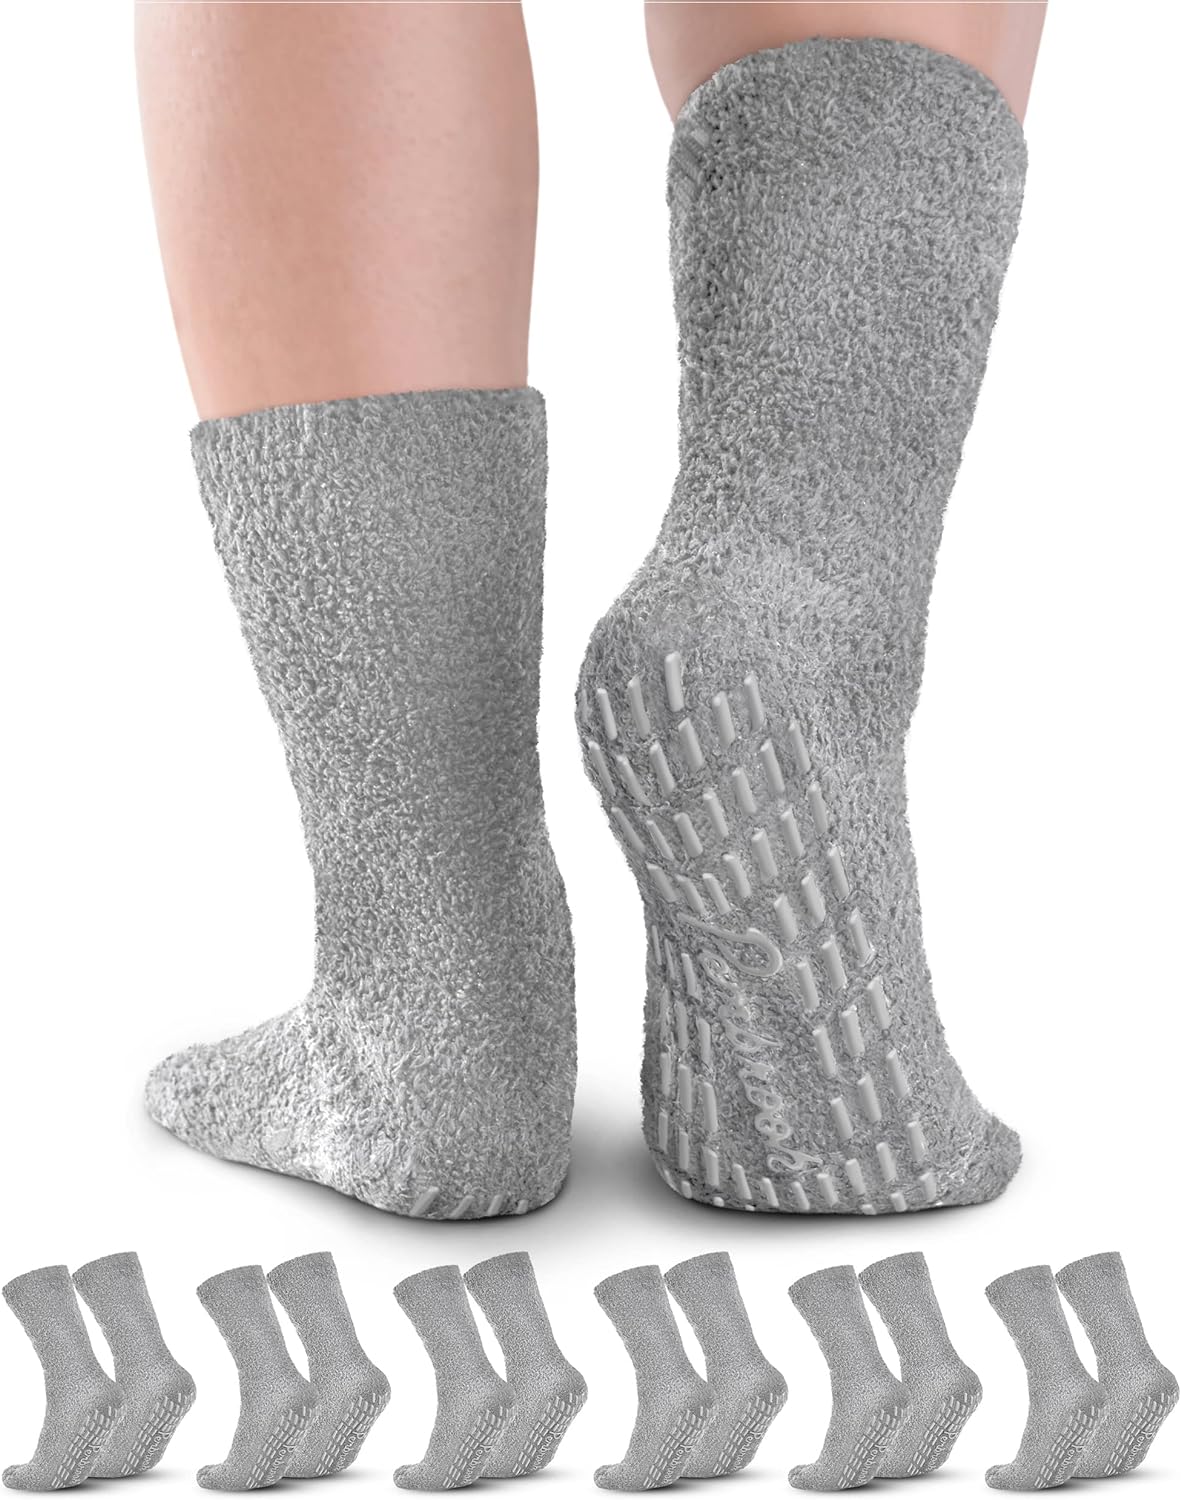 Pembrook Fuzzy Socks with Grips for Women and Men - 6 Pairs Non Skid Socks  / No